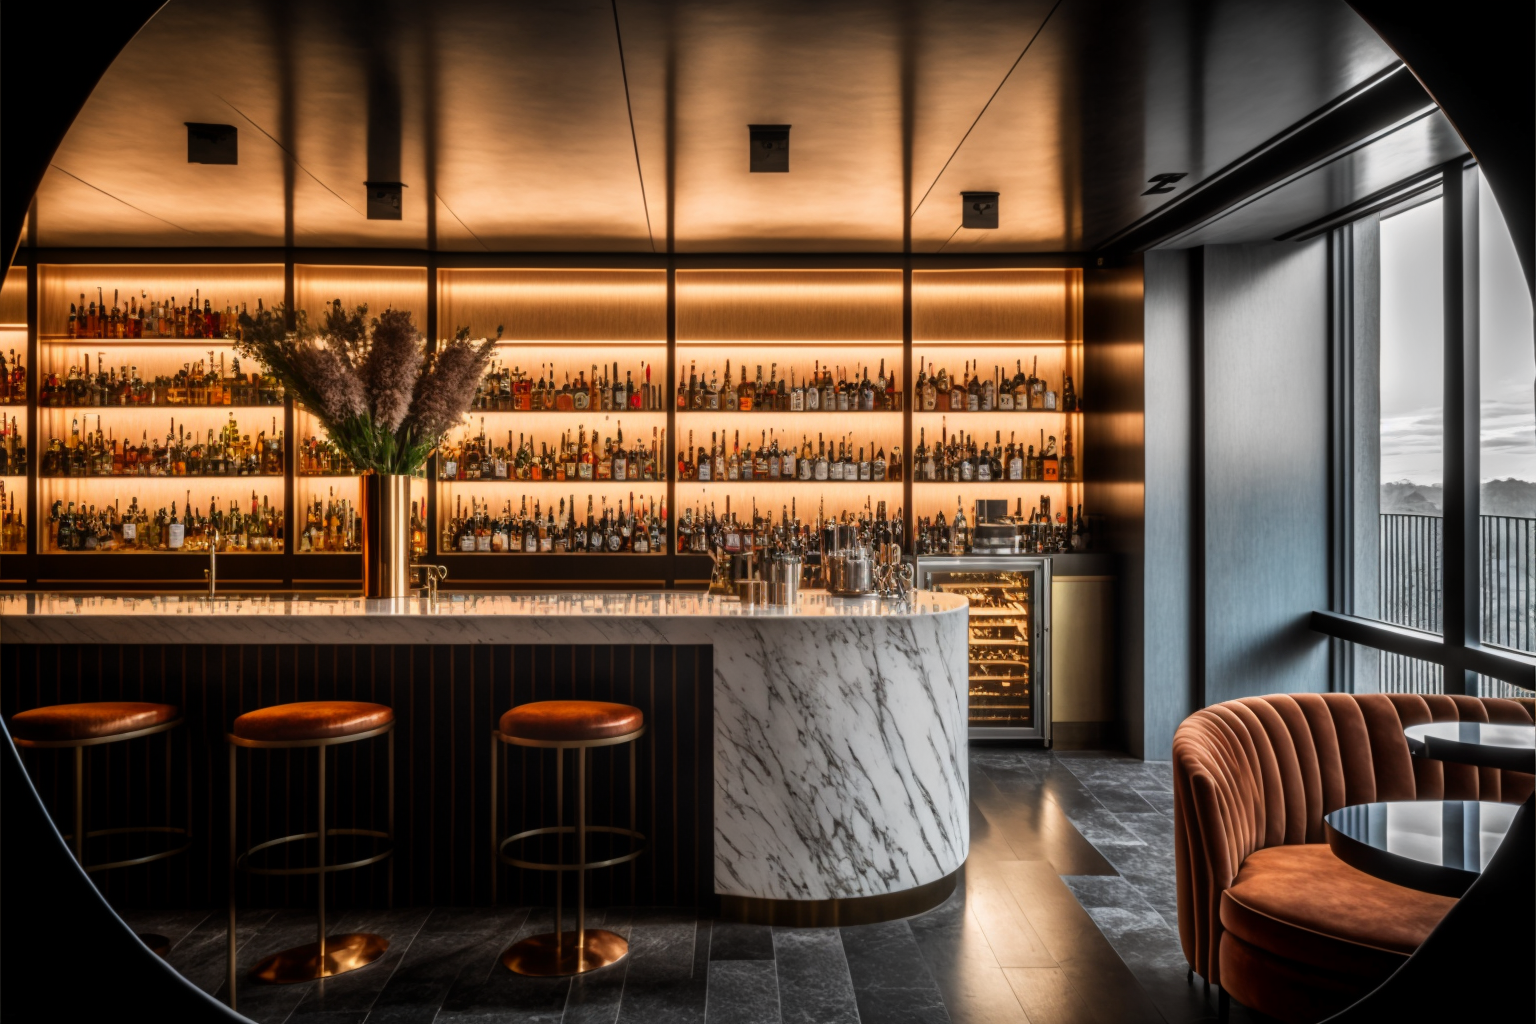 dwpdesign_interior_of_ultra_luxury_whisky_bar_design_by_axel_ve_f1276614-eac3-4fae-8087-65b3286a0d93